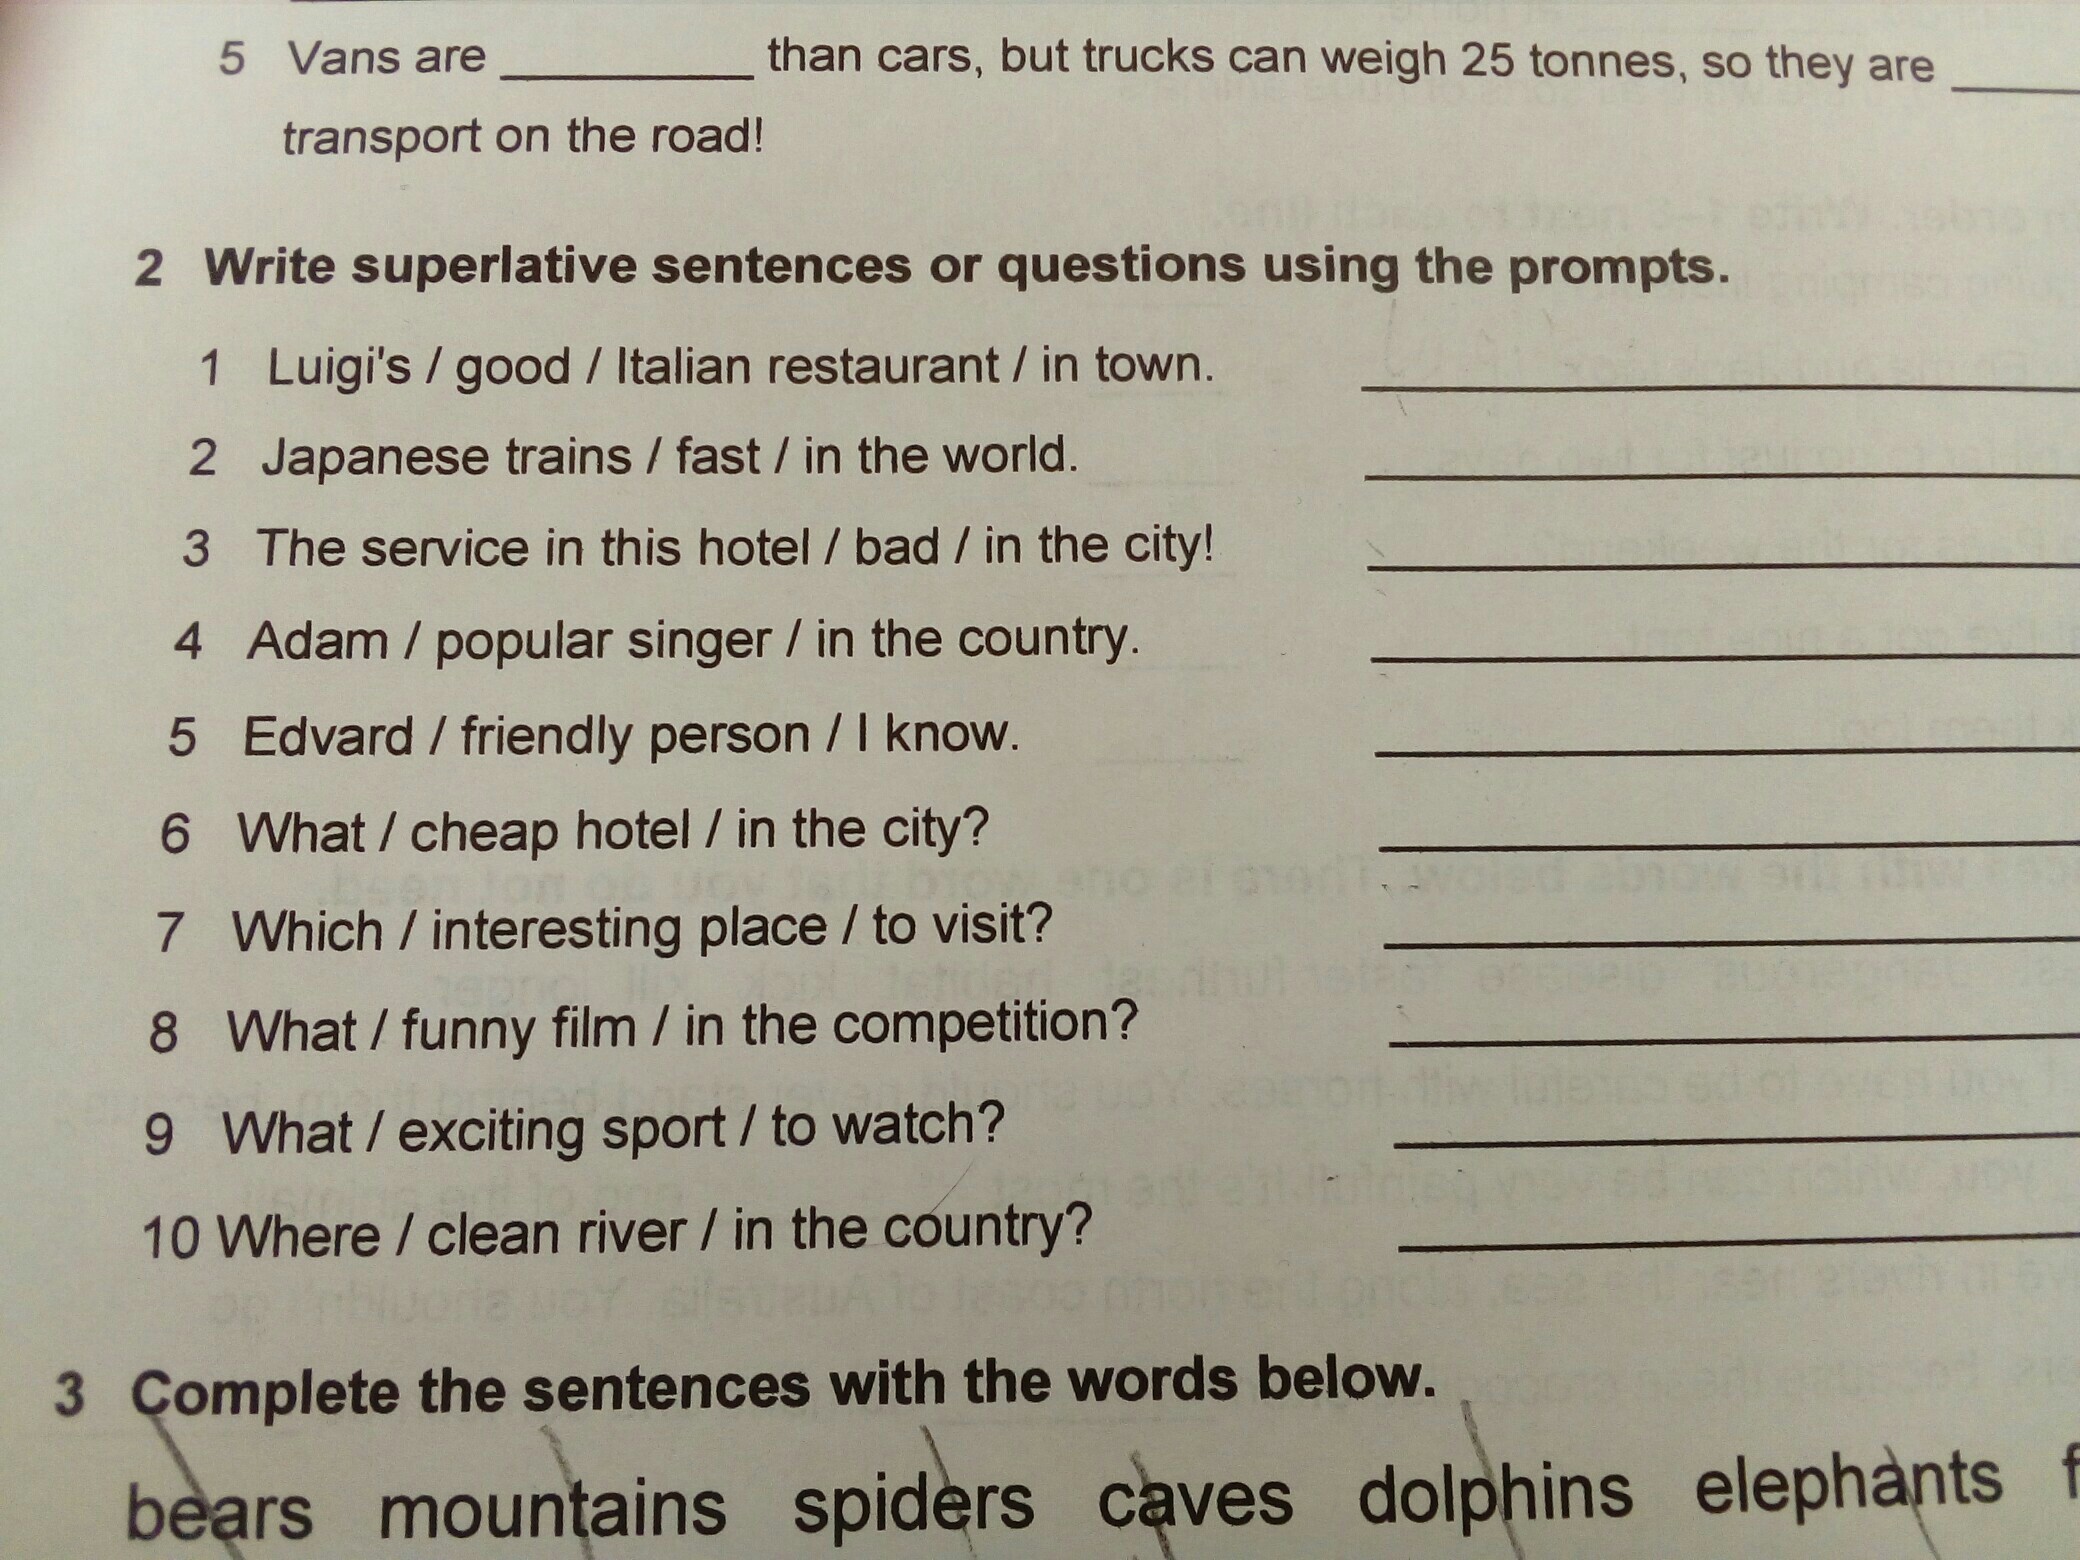 Complete the sentences and use superlative. Write sentences using the prompts. Write questions using the prompts. Use the Words below to write Superlative sentences. Use the prompts to complete the sentences 6 класс ответы.